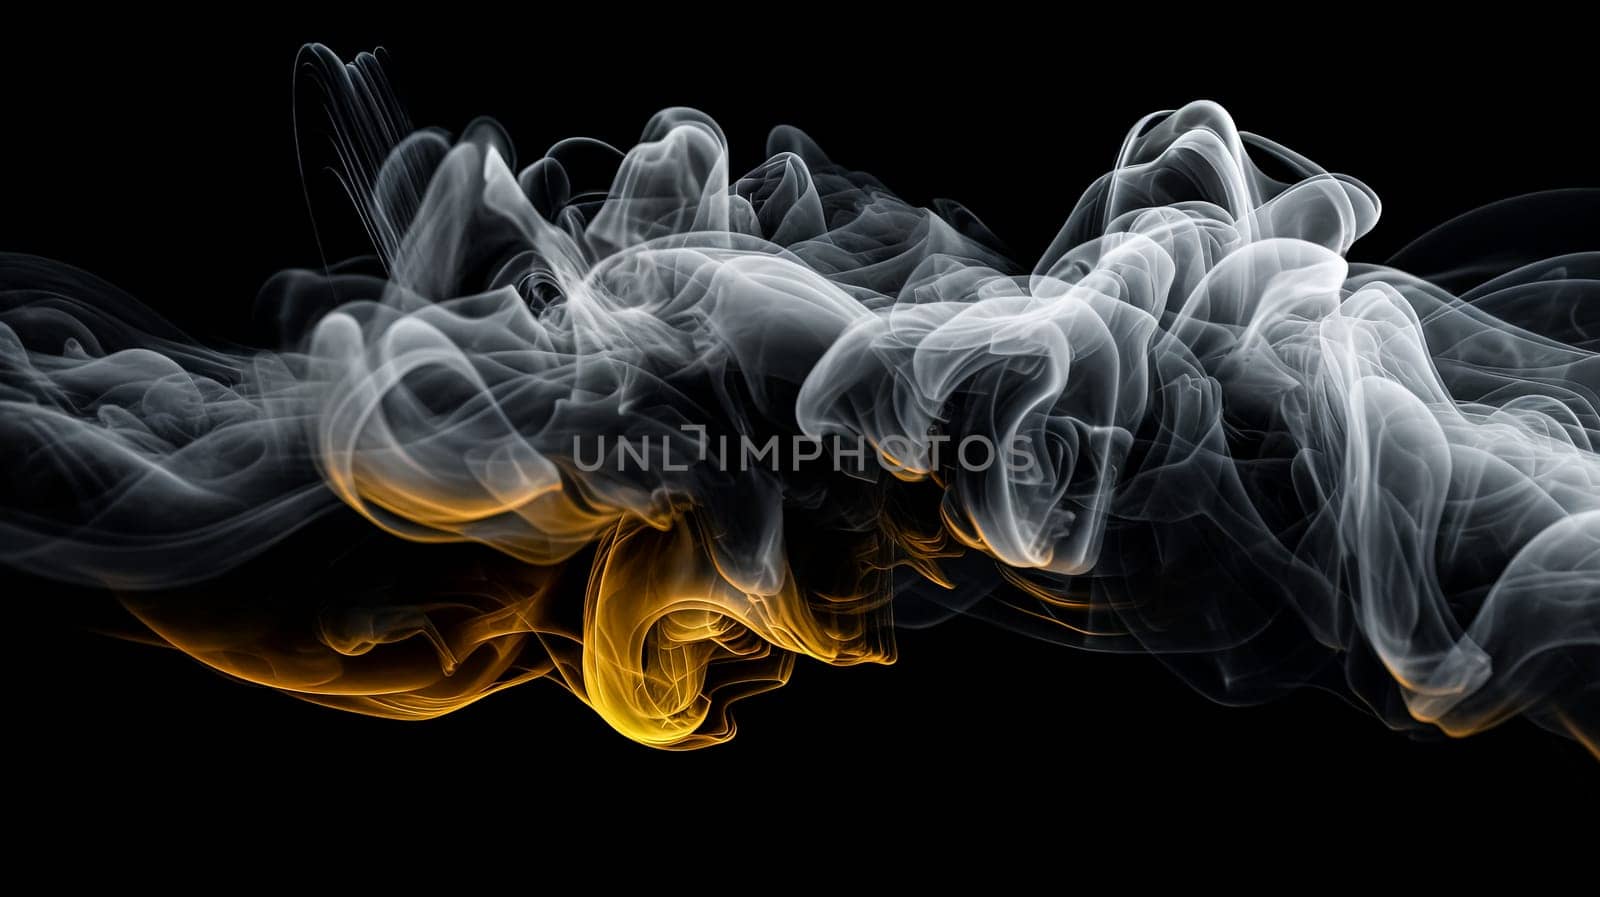 A colorful cloud of smoke with a blue, orange, and purple streak. The smoke is thick and billowing, creating a sense of movement and energy. The colors of the smoke contrast with the dark background